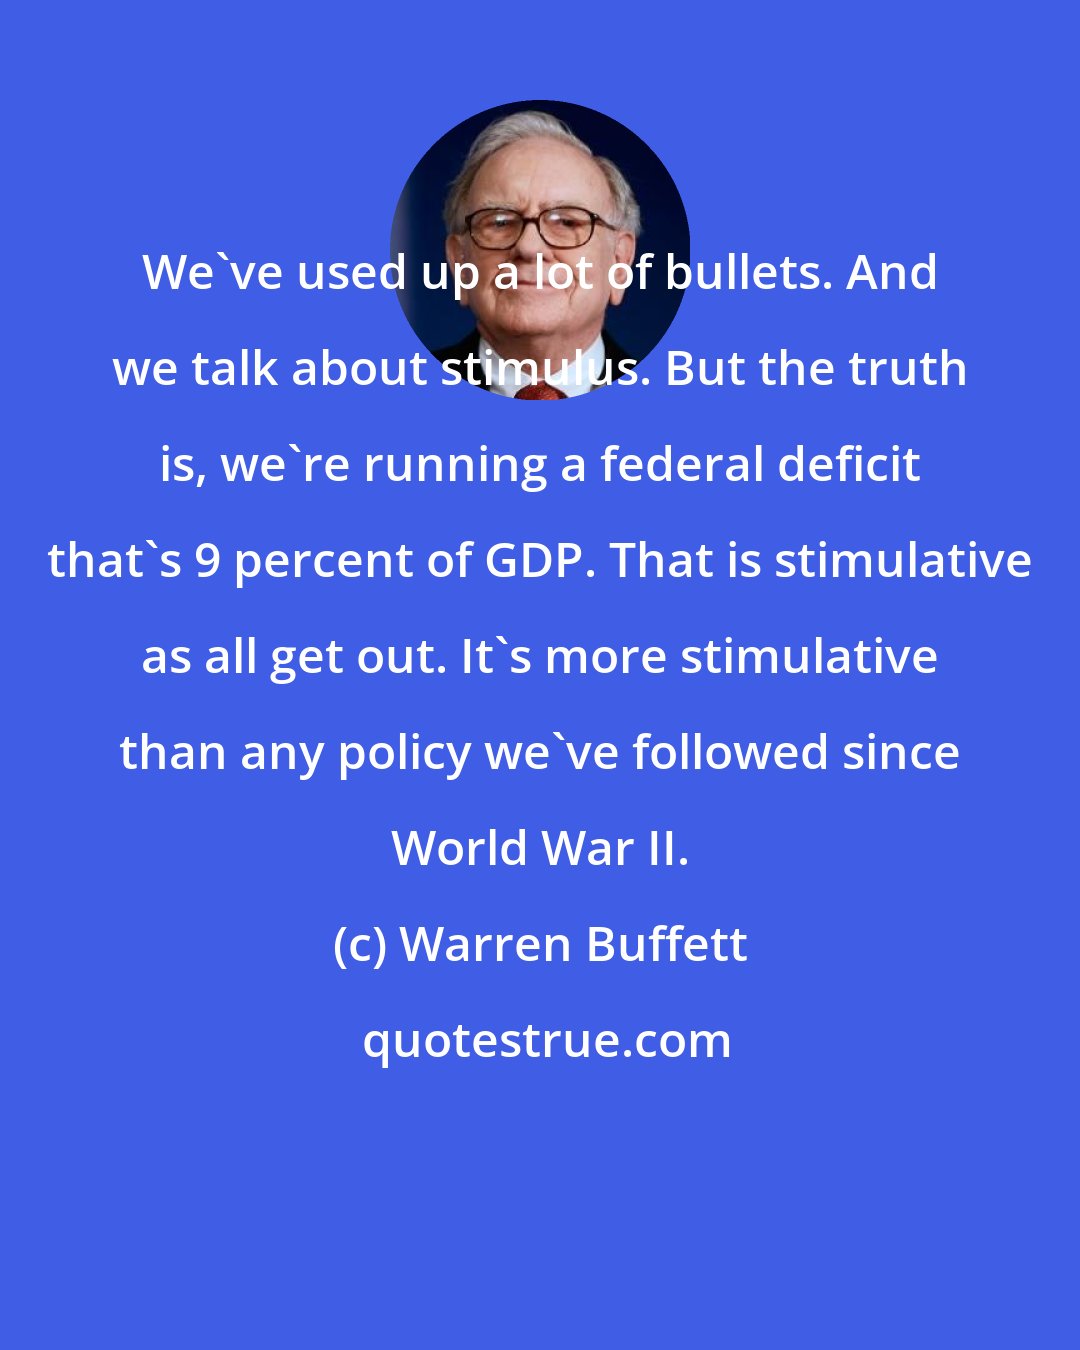 Warren Buffett: We've used up a lot of bullets. And we talk about stimulus. But the truth is, we're running a federal deficit that's 9 percent of GDP. That is stimulative as all get out. It's more stimulative than any policy we've followed since World War II.